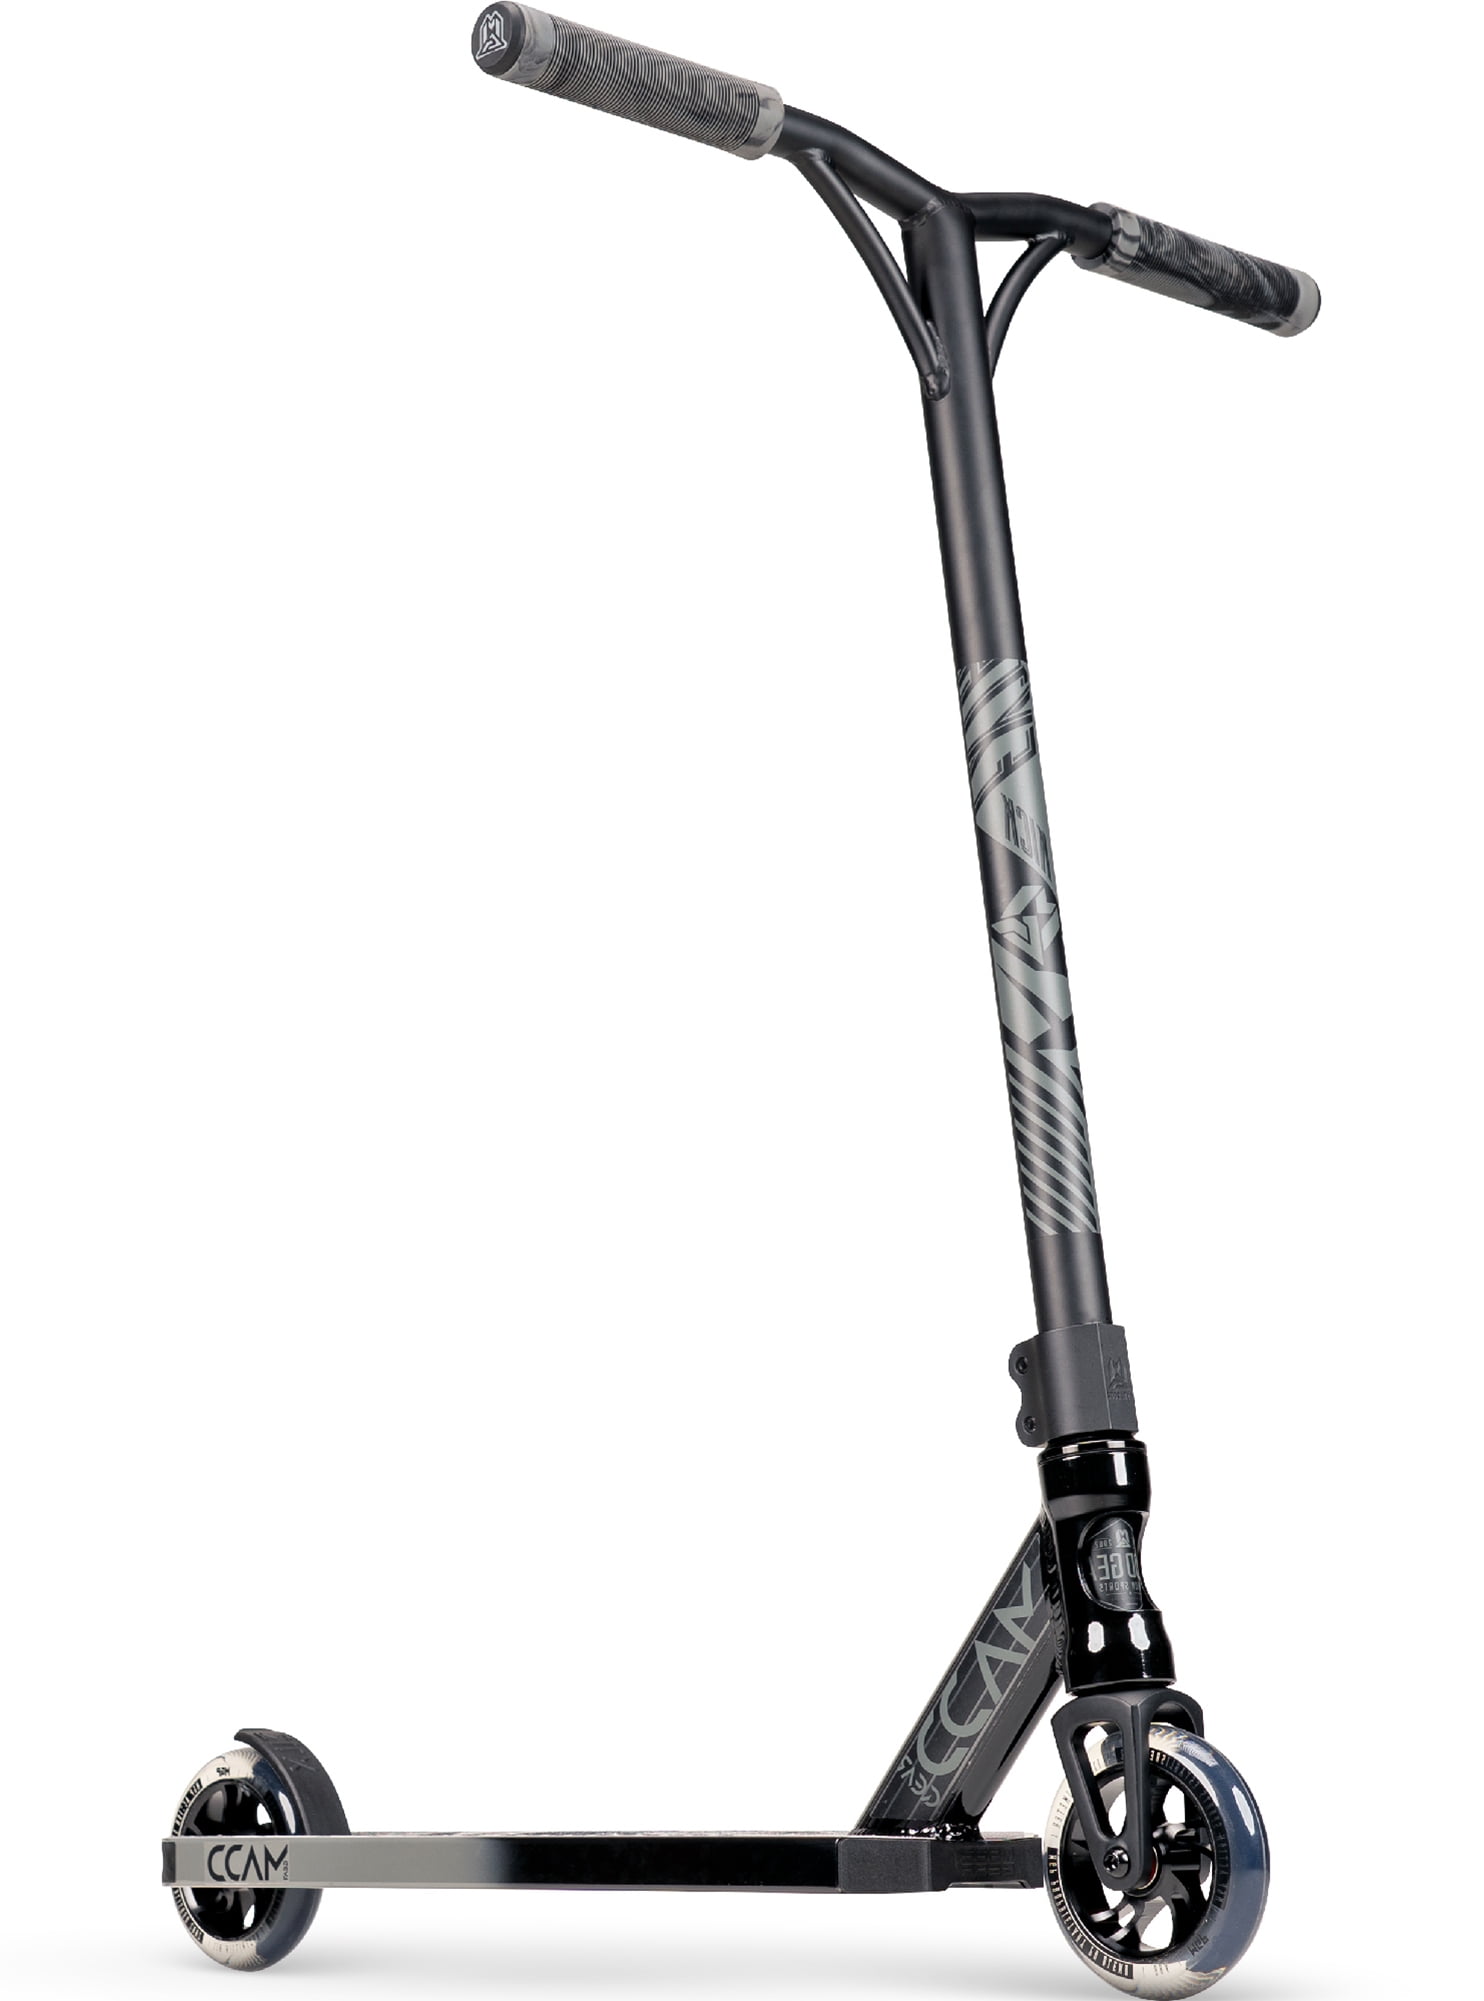 Madd Gear Kick Extreme Pro Stunt Scooter for Ages 8 + Strong Aluminum 5